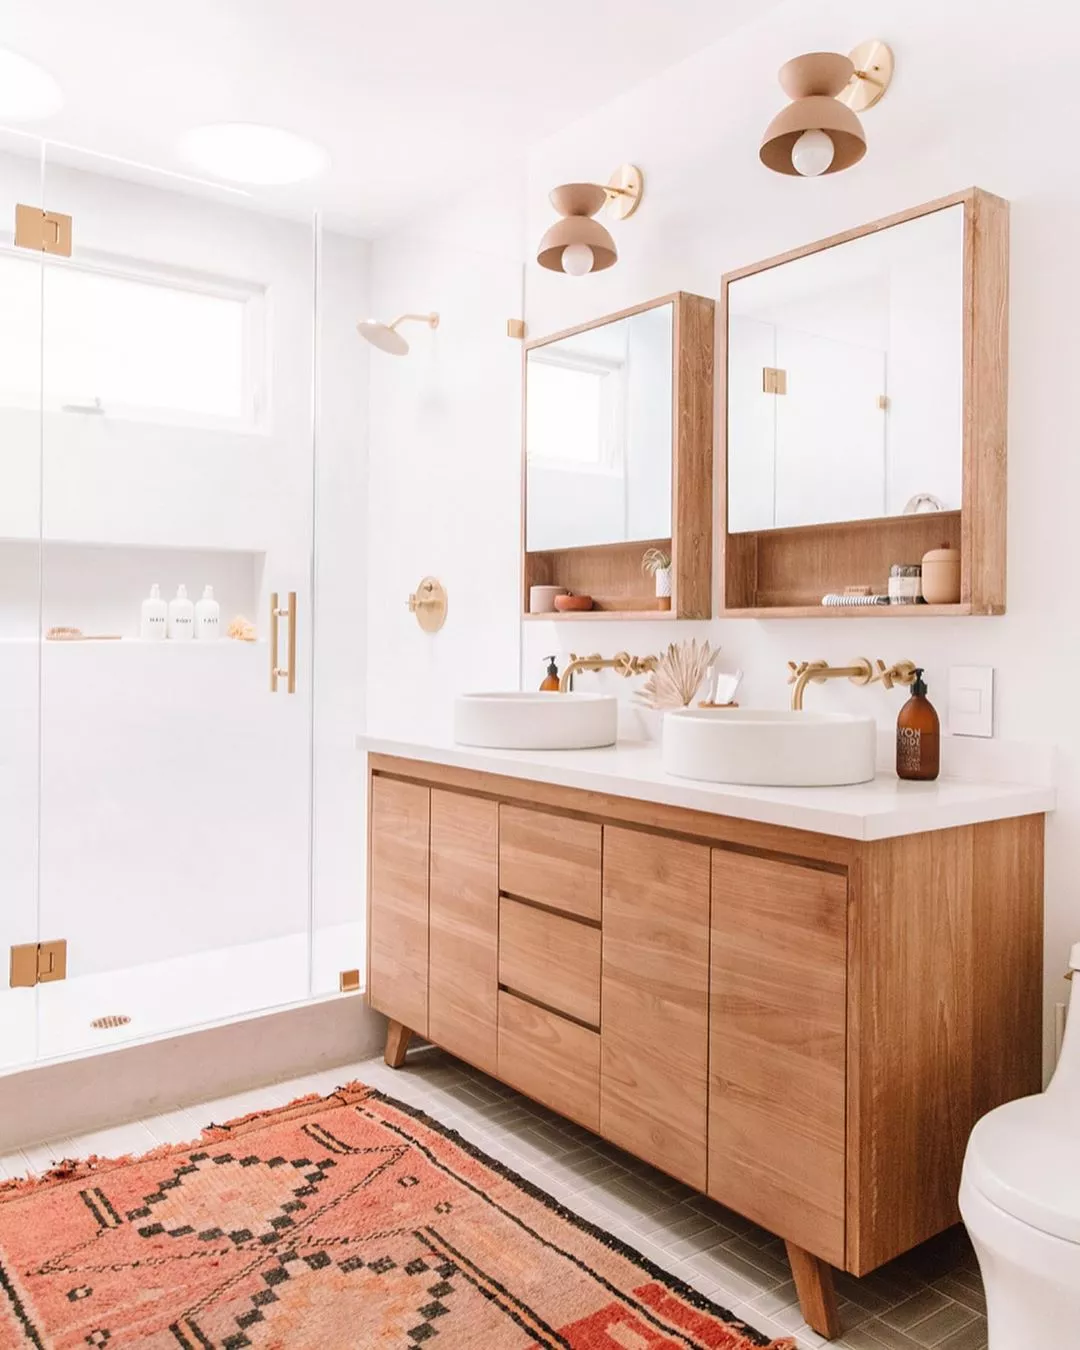 Smart Bathroom Storage Solutions (For Any Size Bathroom!)